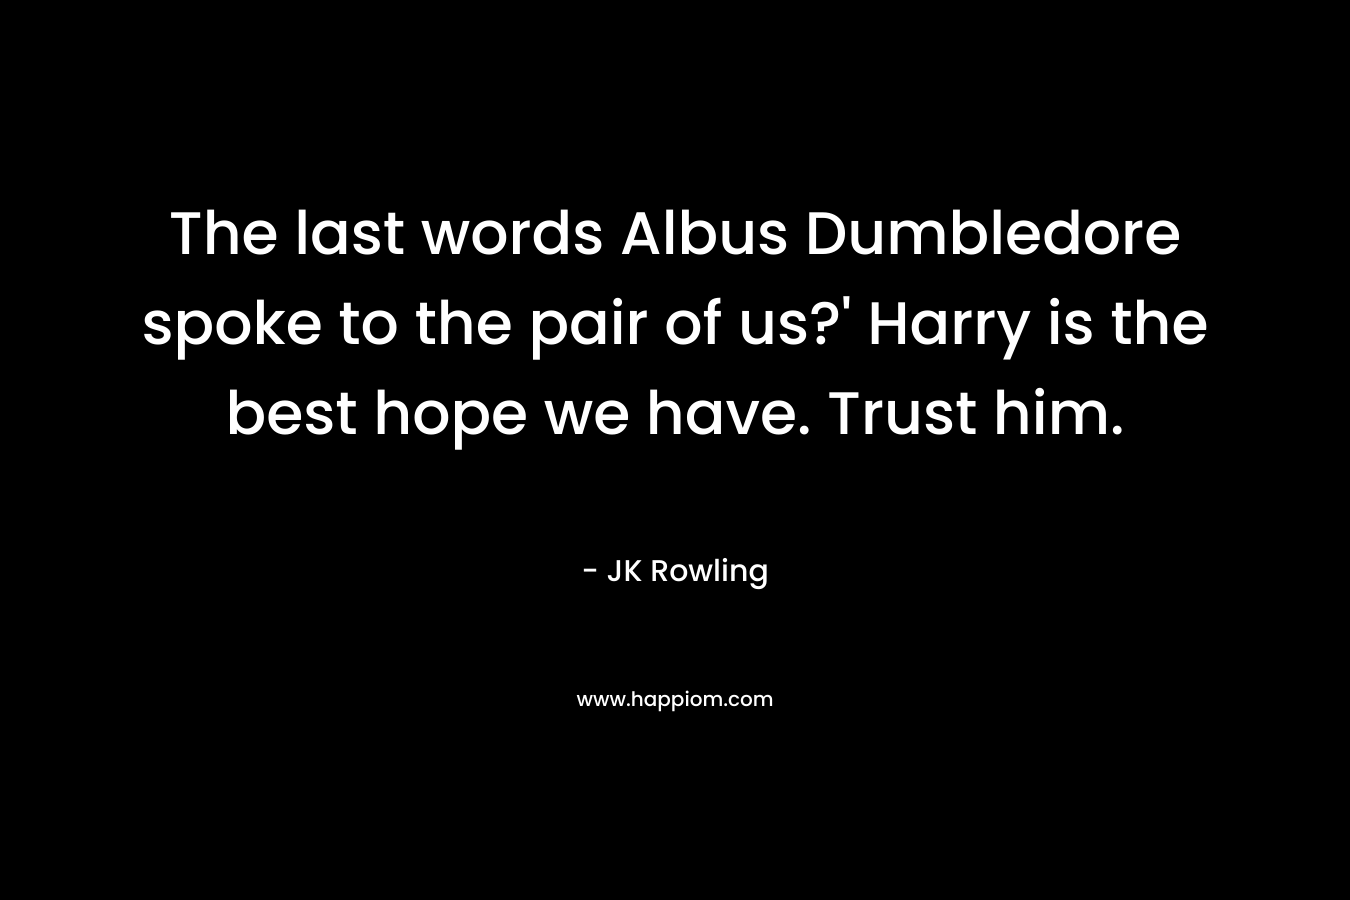 The last words Albus Dumbledore spoke to the pair of us?' Harry is the best hope we have. Trust him.